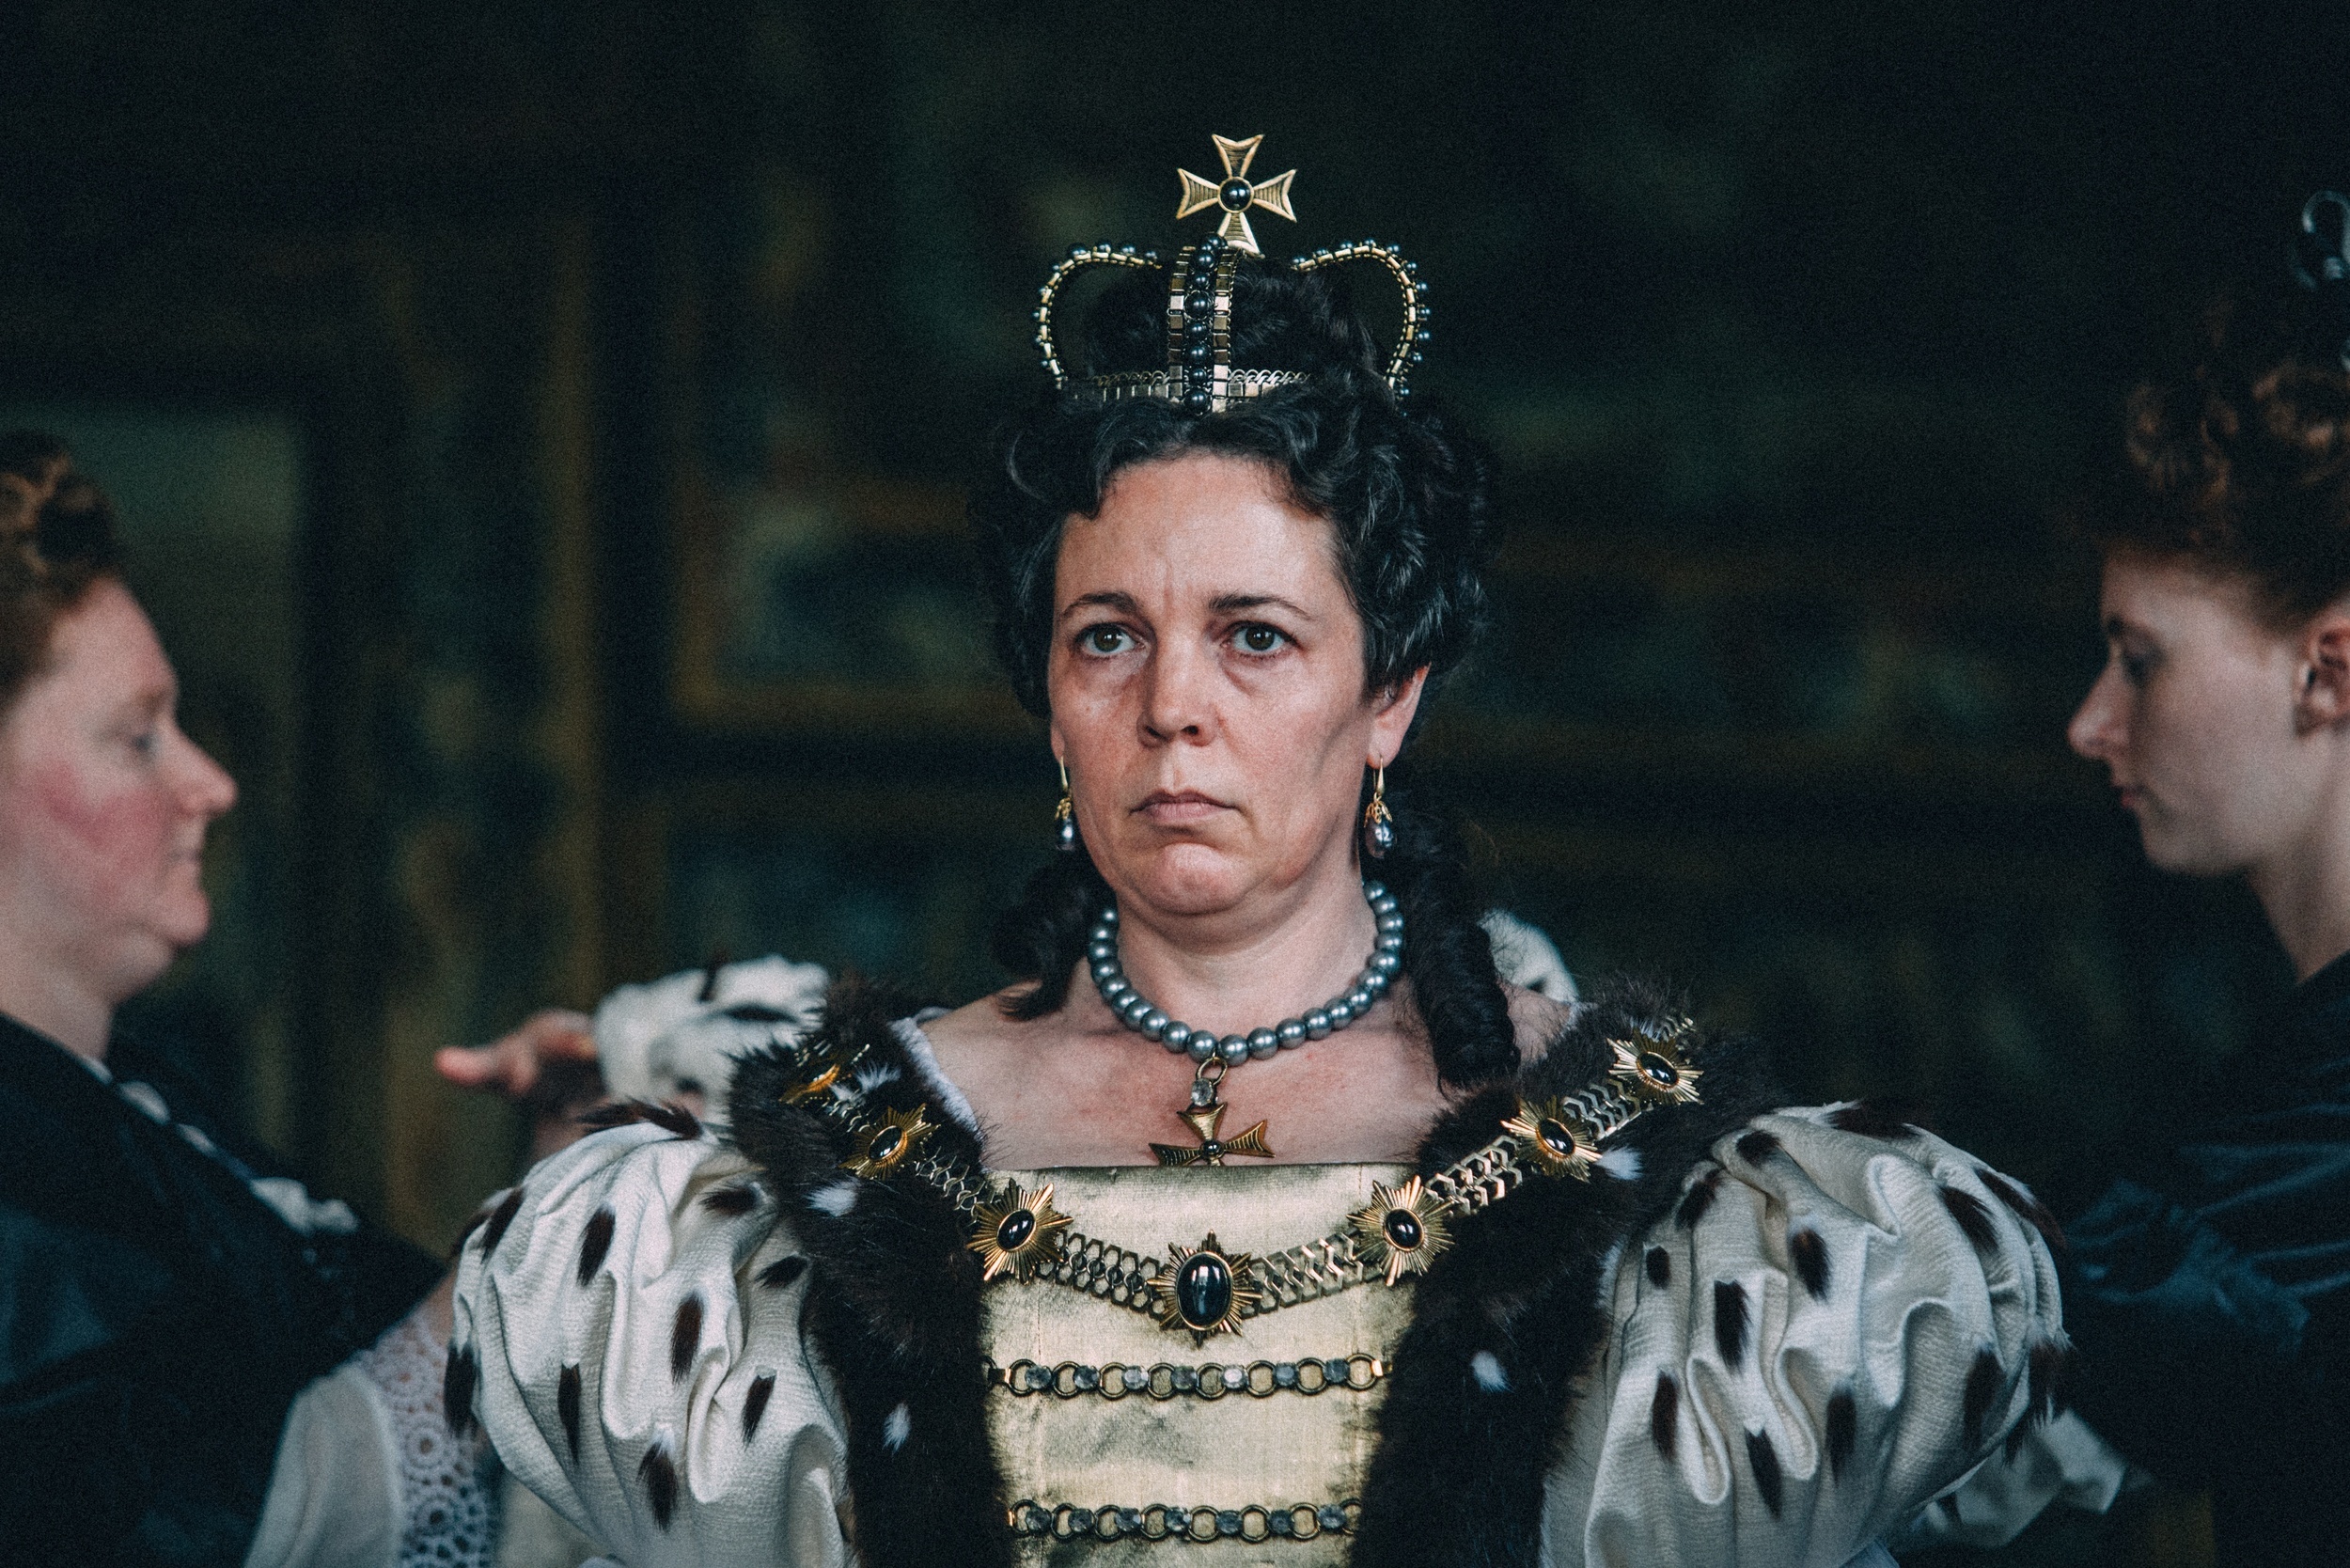 <p>Yorgos Lanthimos was never going to give us a normal movie about royalty. He’s the guy who directed <em>Dogtooth</em> and <em>The Lobster</em>, after all. However, this black comedy about Queen Anne and two of her royal consorts struck a chord with Oscar voters. Olivia Colman’s turn as Anne won her Best Actress.</p><p>You may also like: <a href='https://www.yardbarker.com/entertainment/articles/20_memorable_one_hit_wonders_from_the_2000s_040824/s1__38734169'>20 memorable one-hit wonders from the 2000s</a></p>